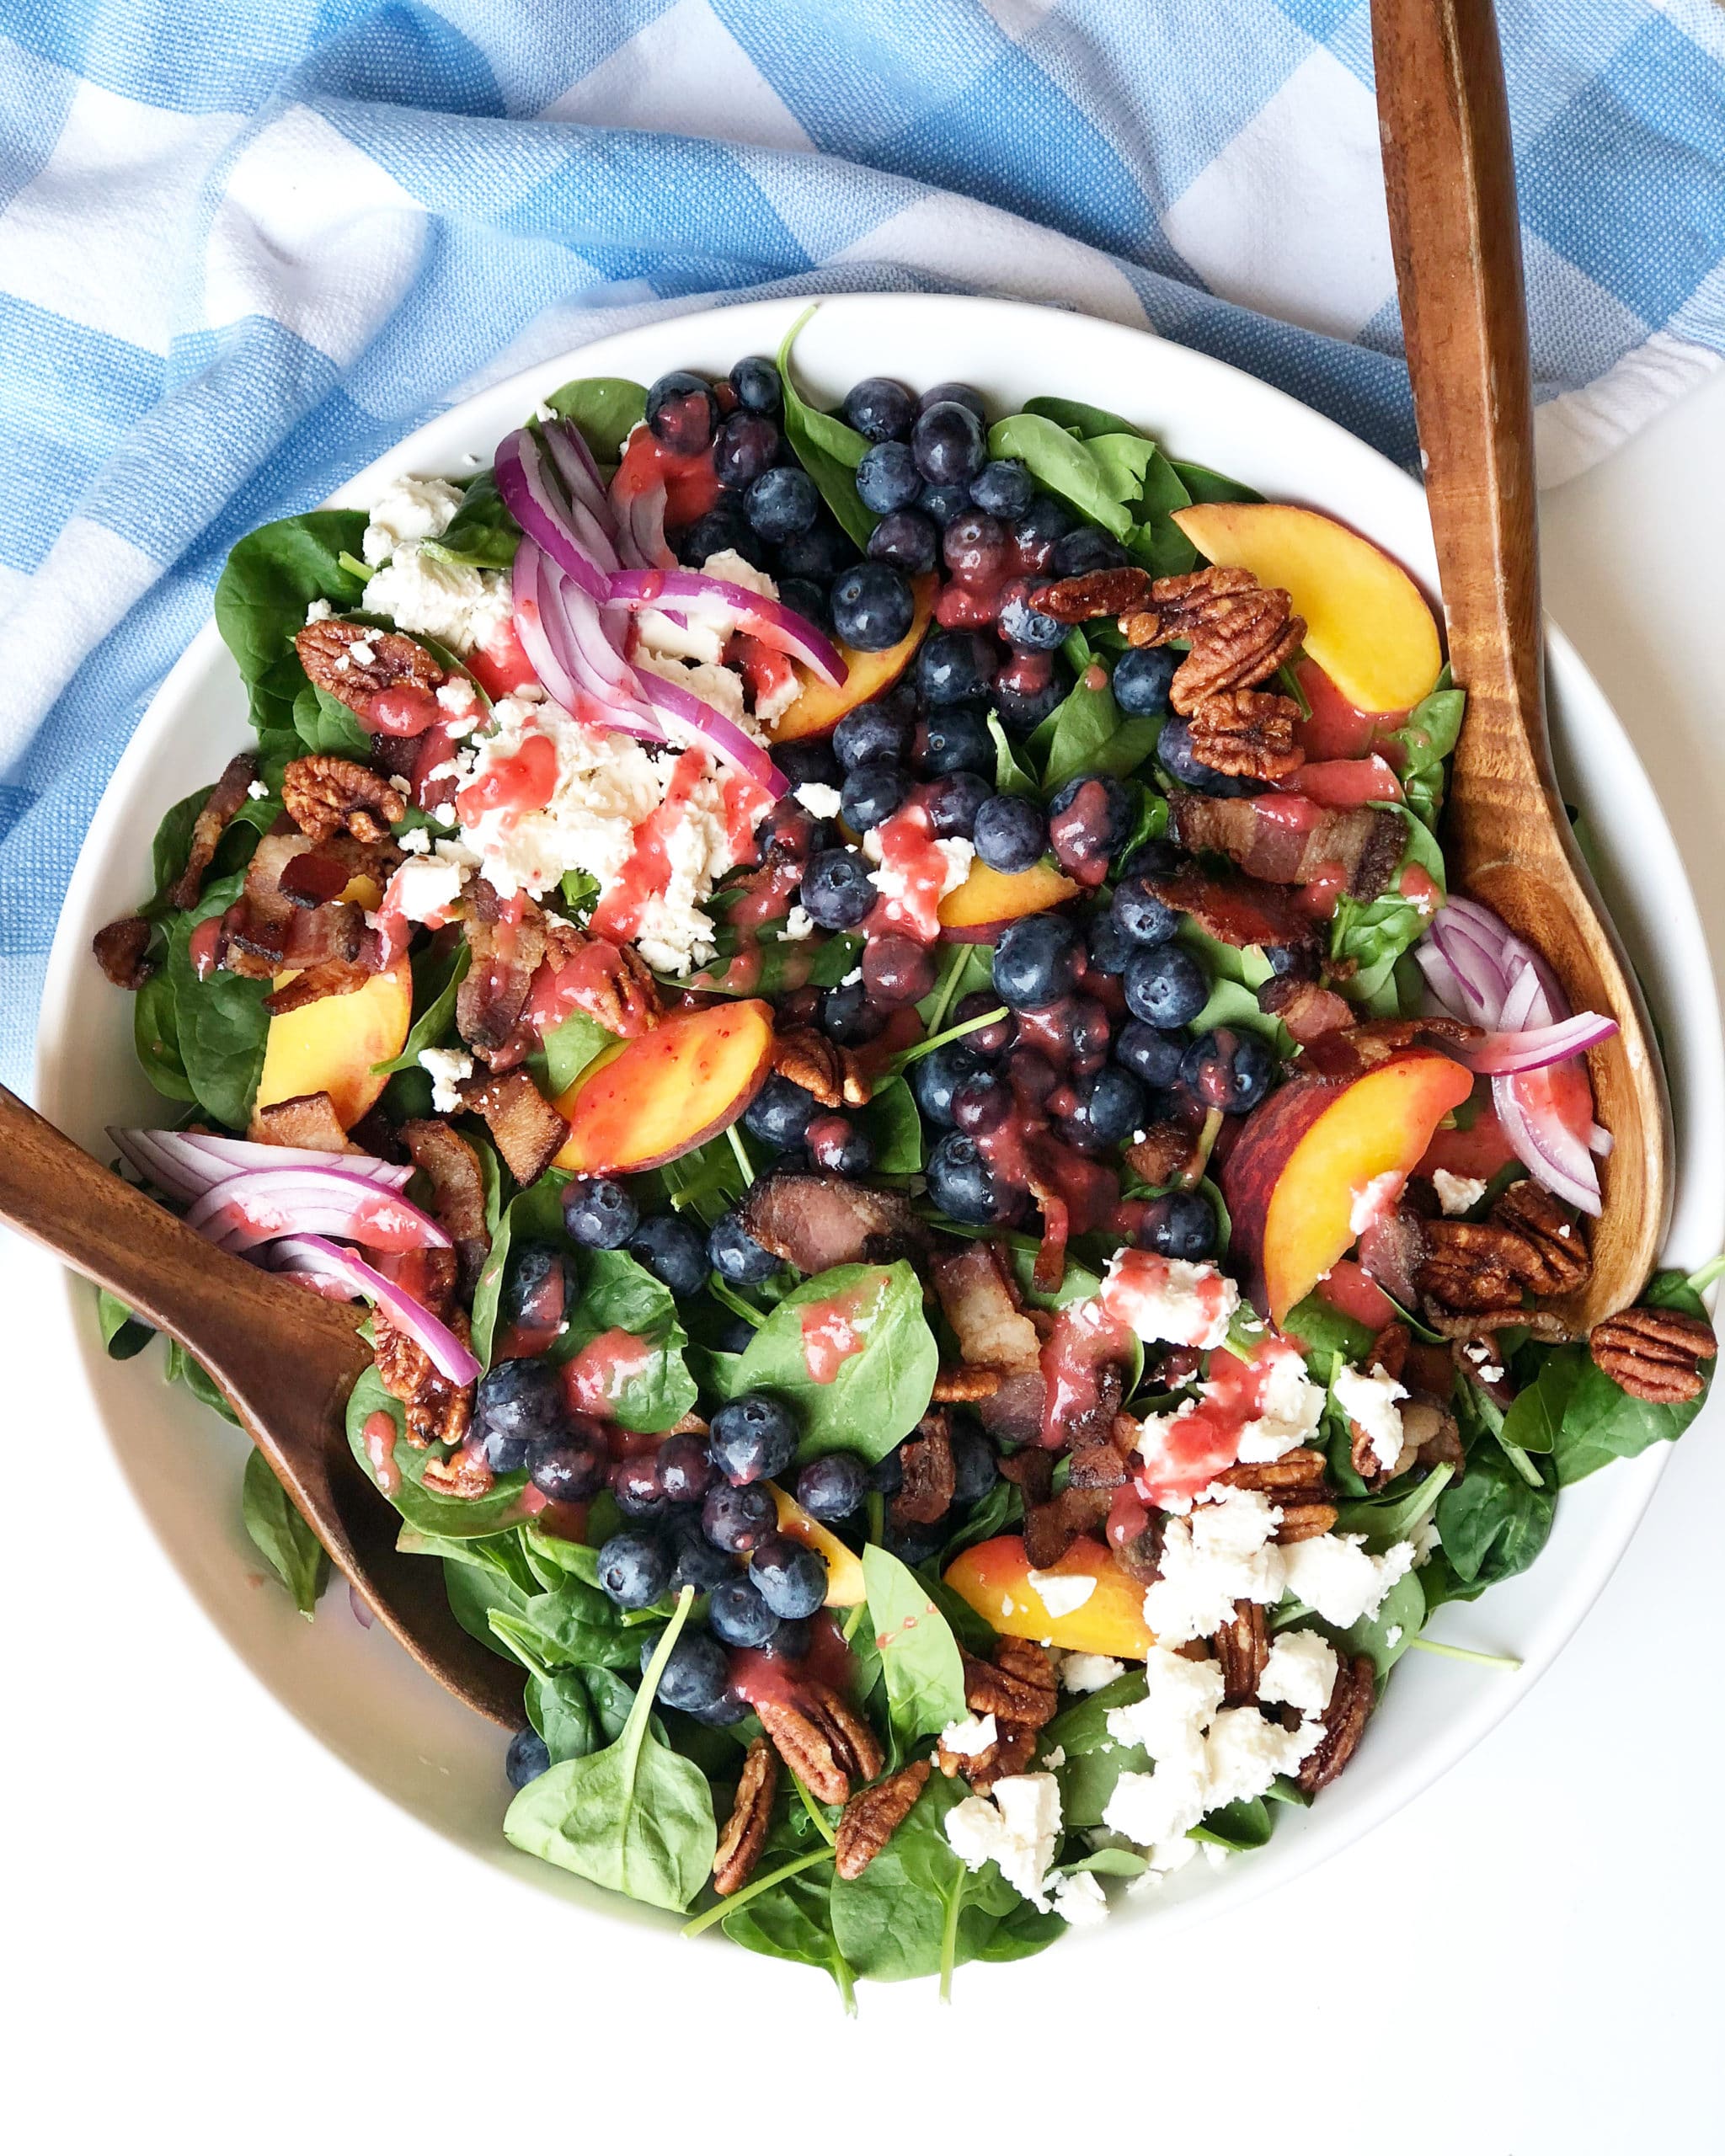 Blueberry Salad with Peaches and Strawberry Dressing